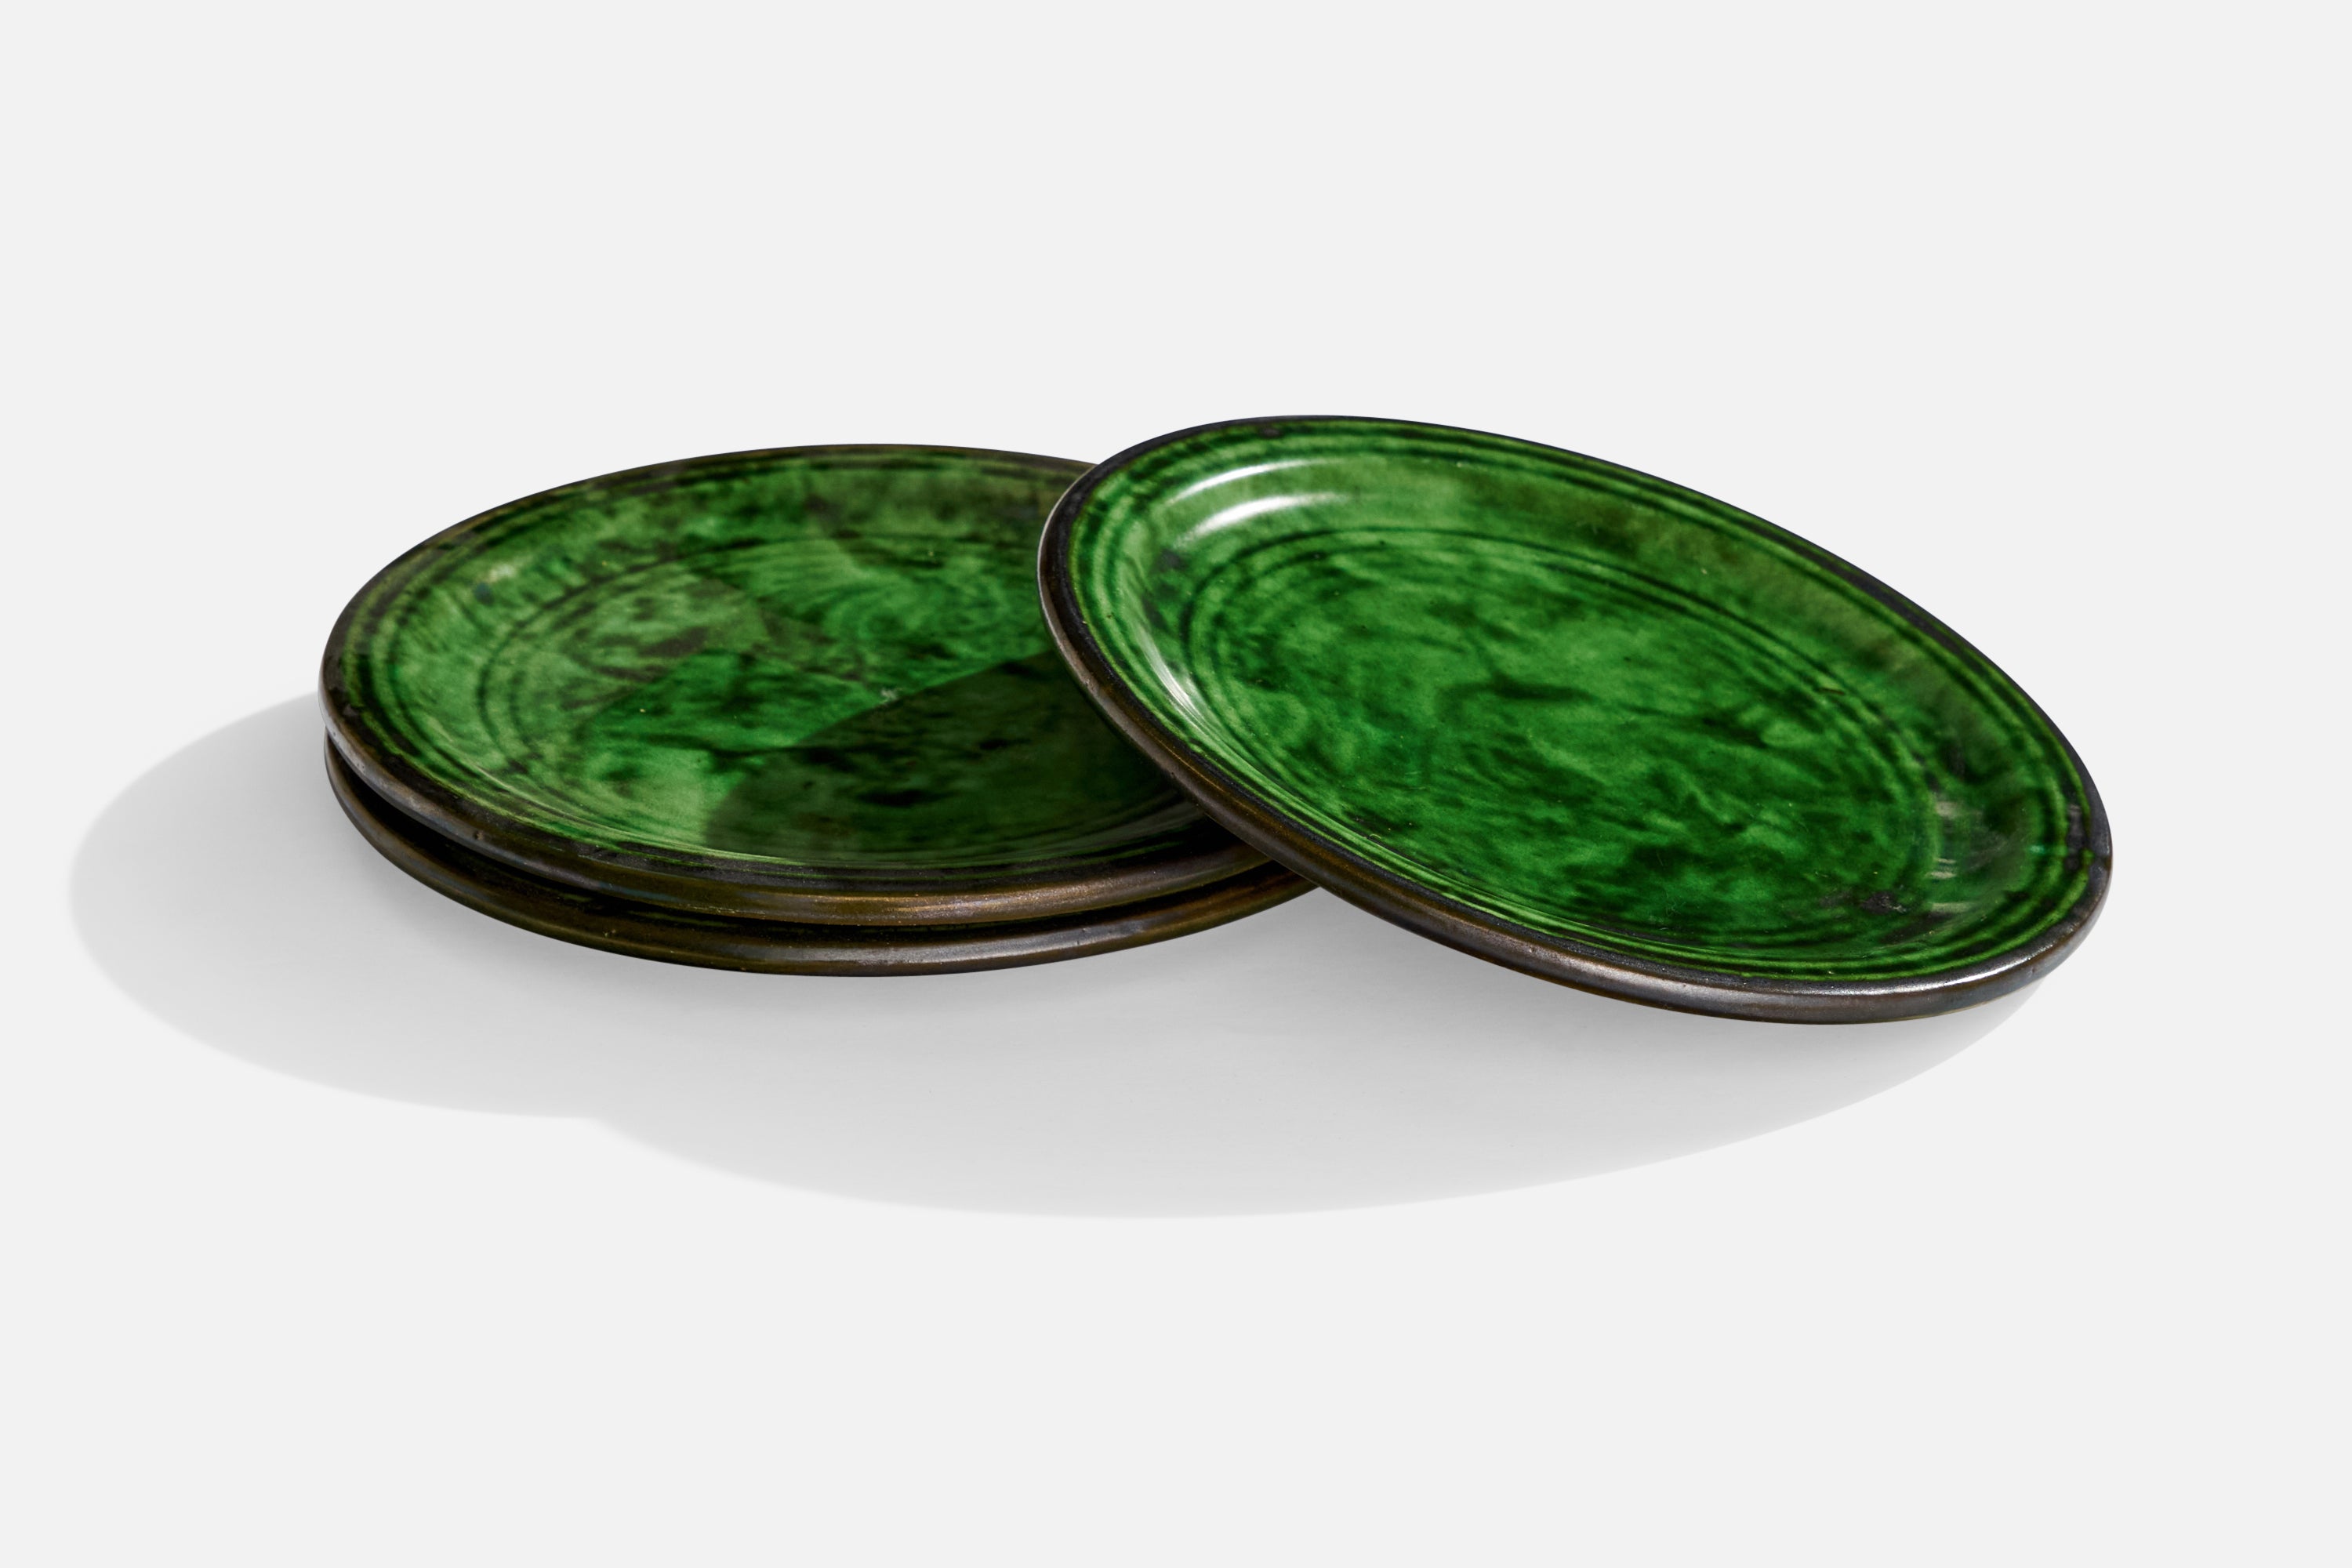 A set of 3 small green-glazed ceramic plates produced by Nittsjö, Sweden, 1930s.